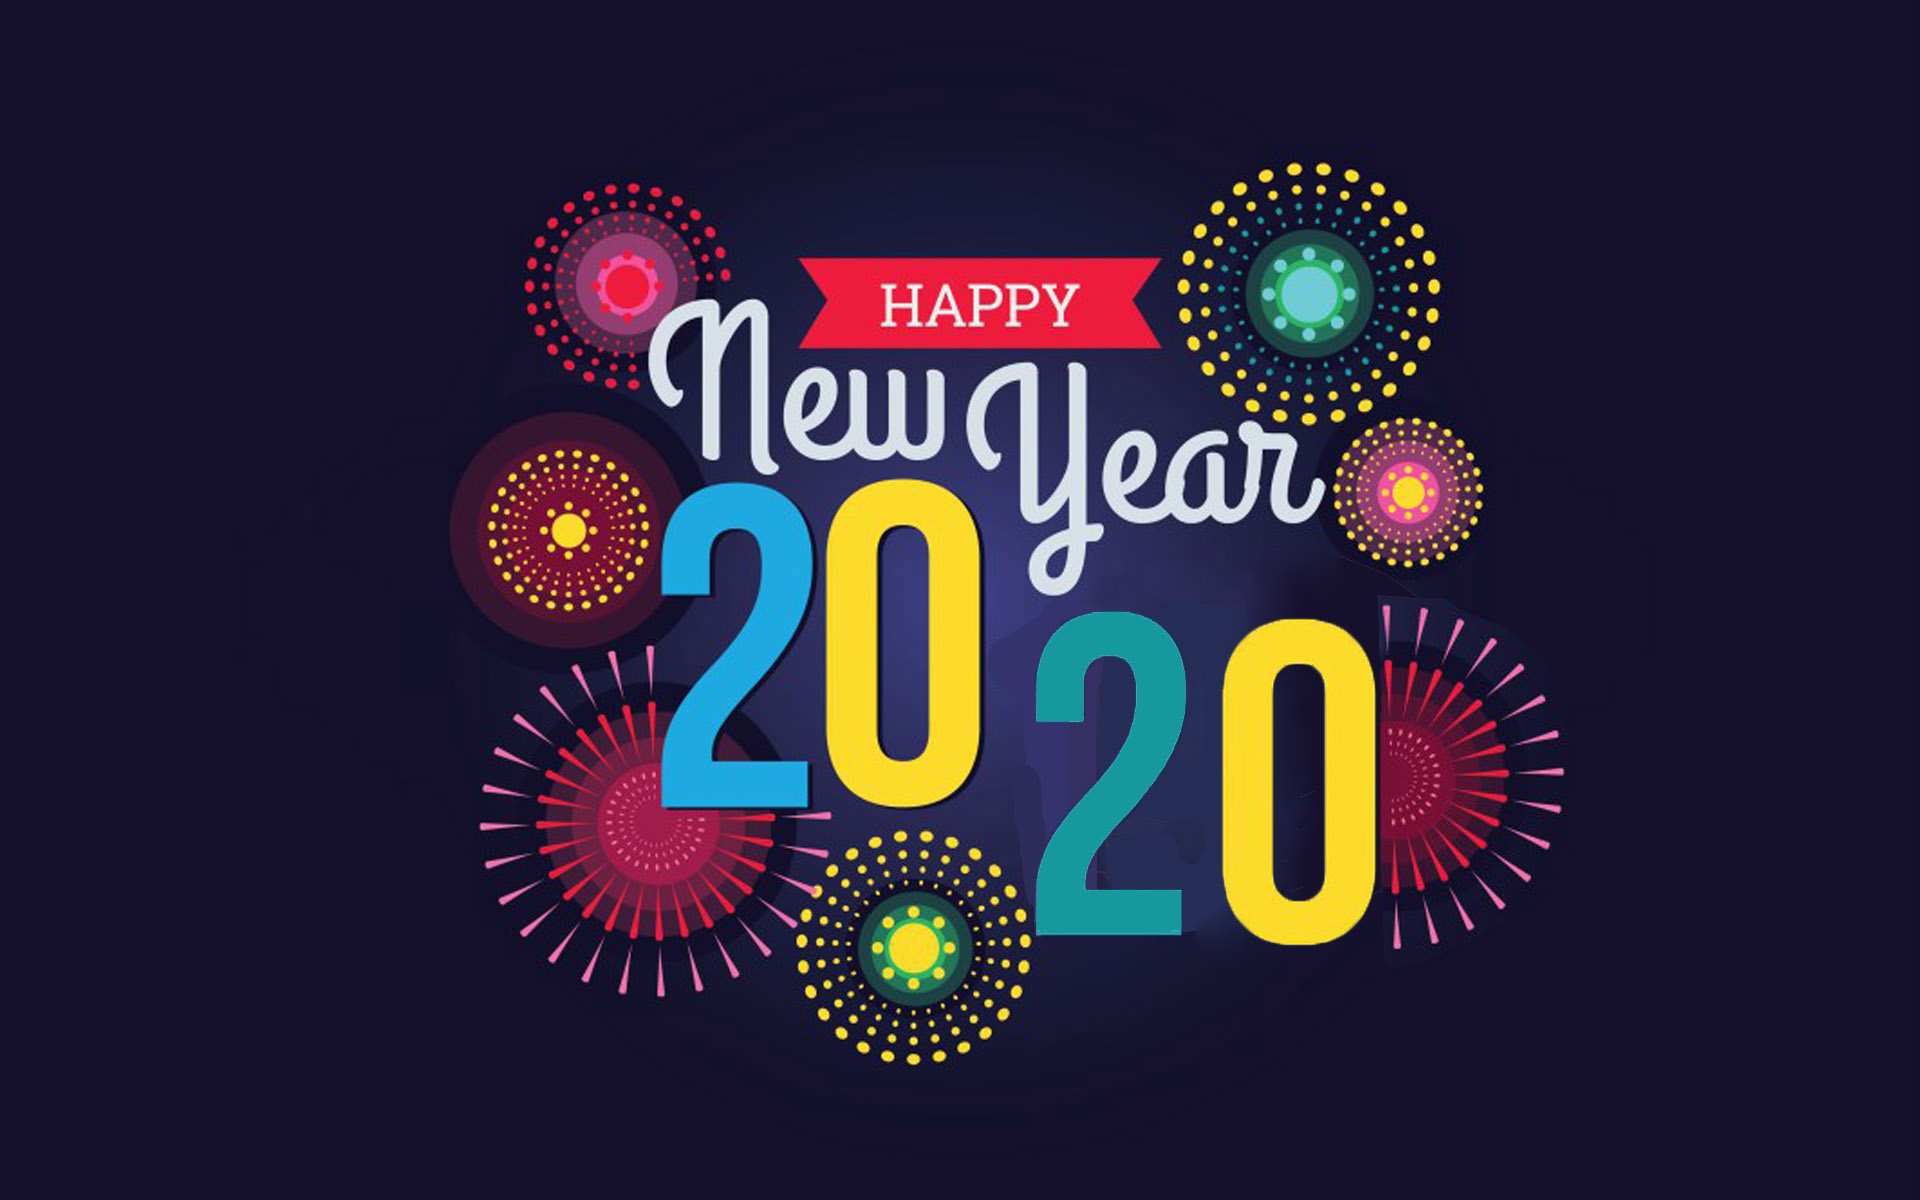 Happy New Year 2020 Hd Wallpaper Images Download Free Happy